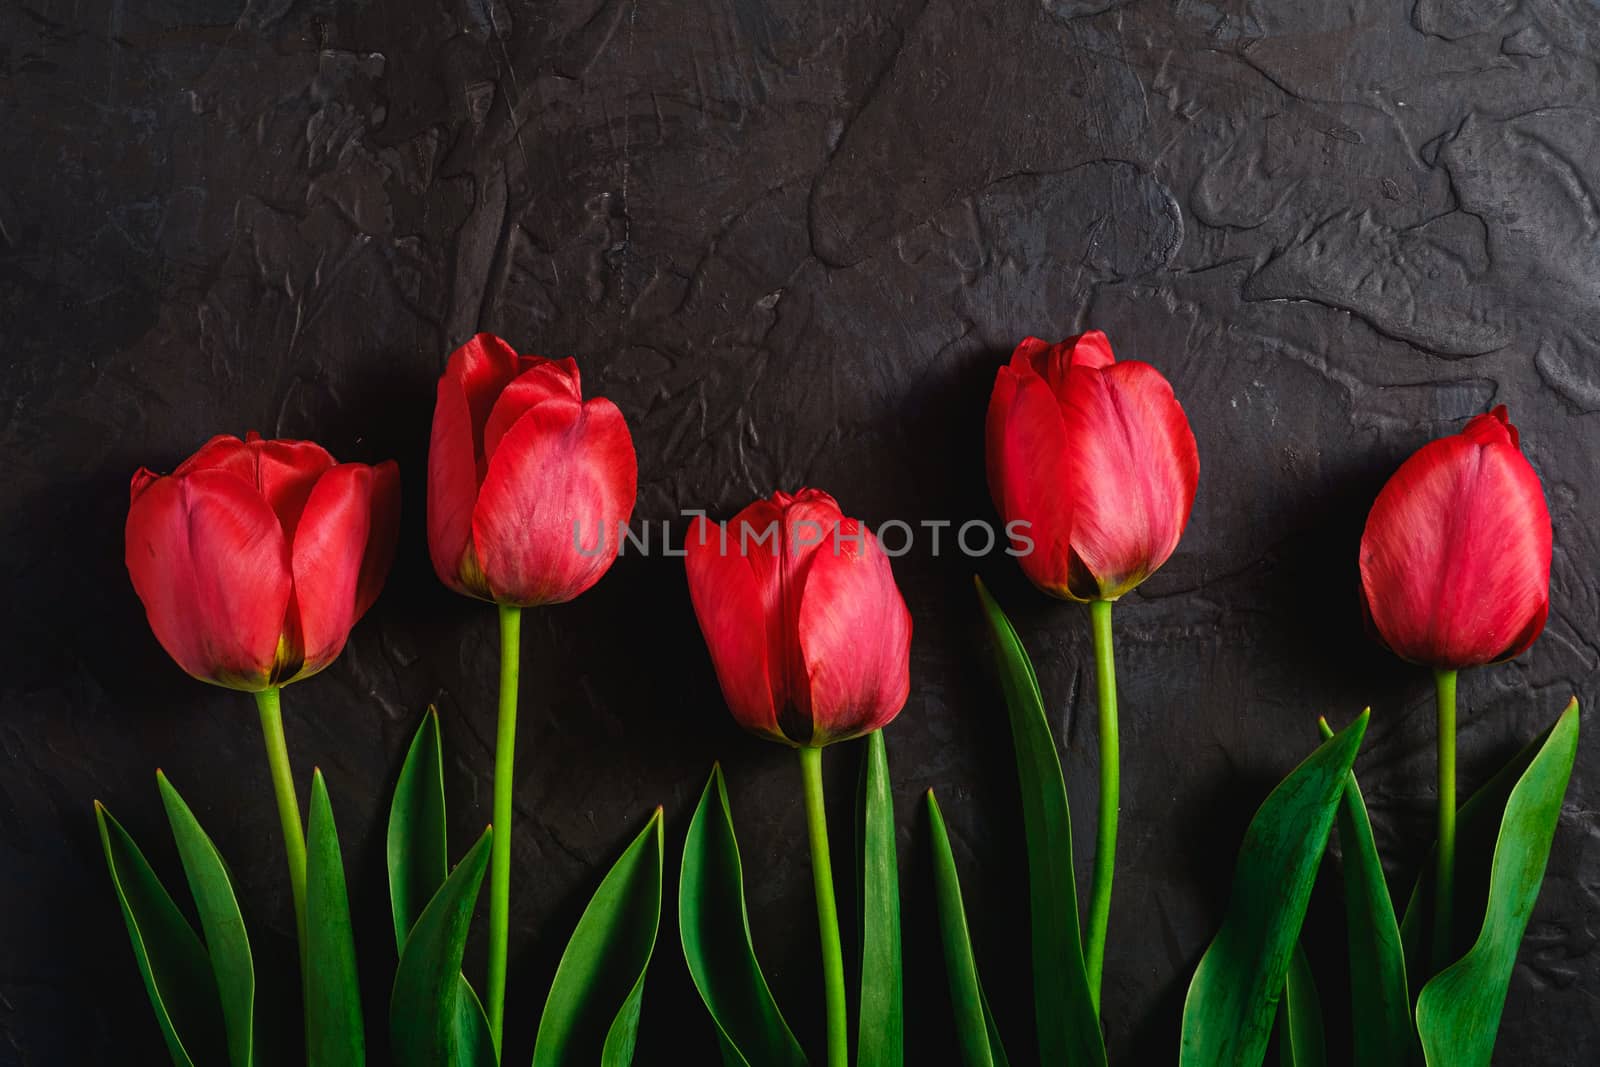 Row of tulip flowers on textured black background, top view by Frostroomhead